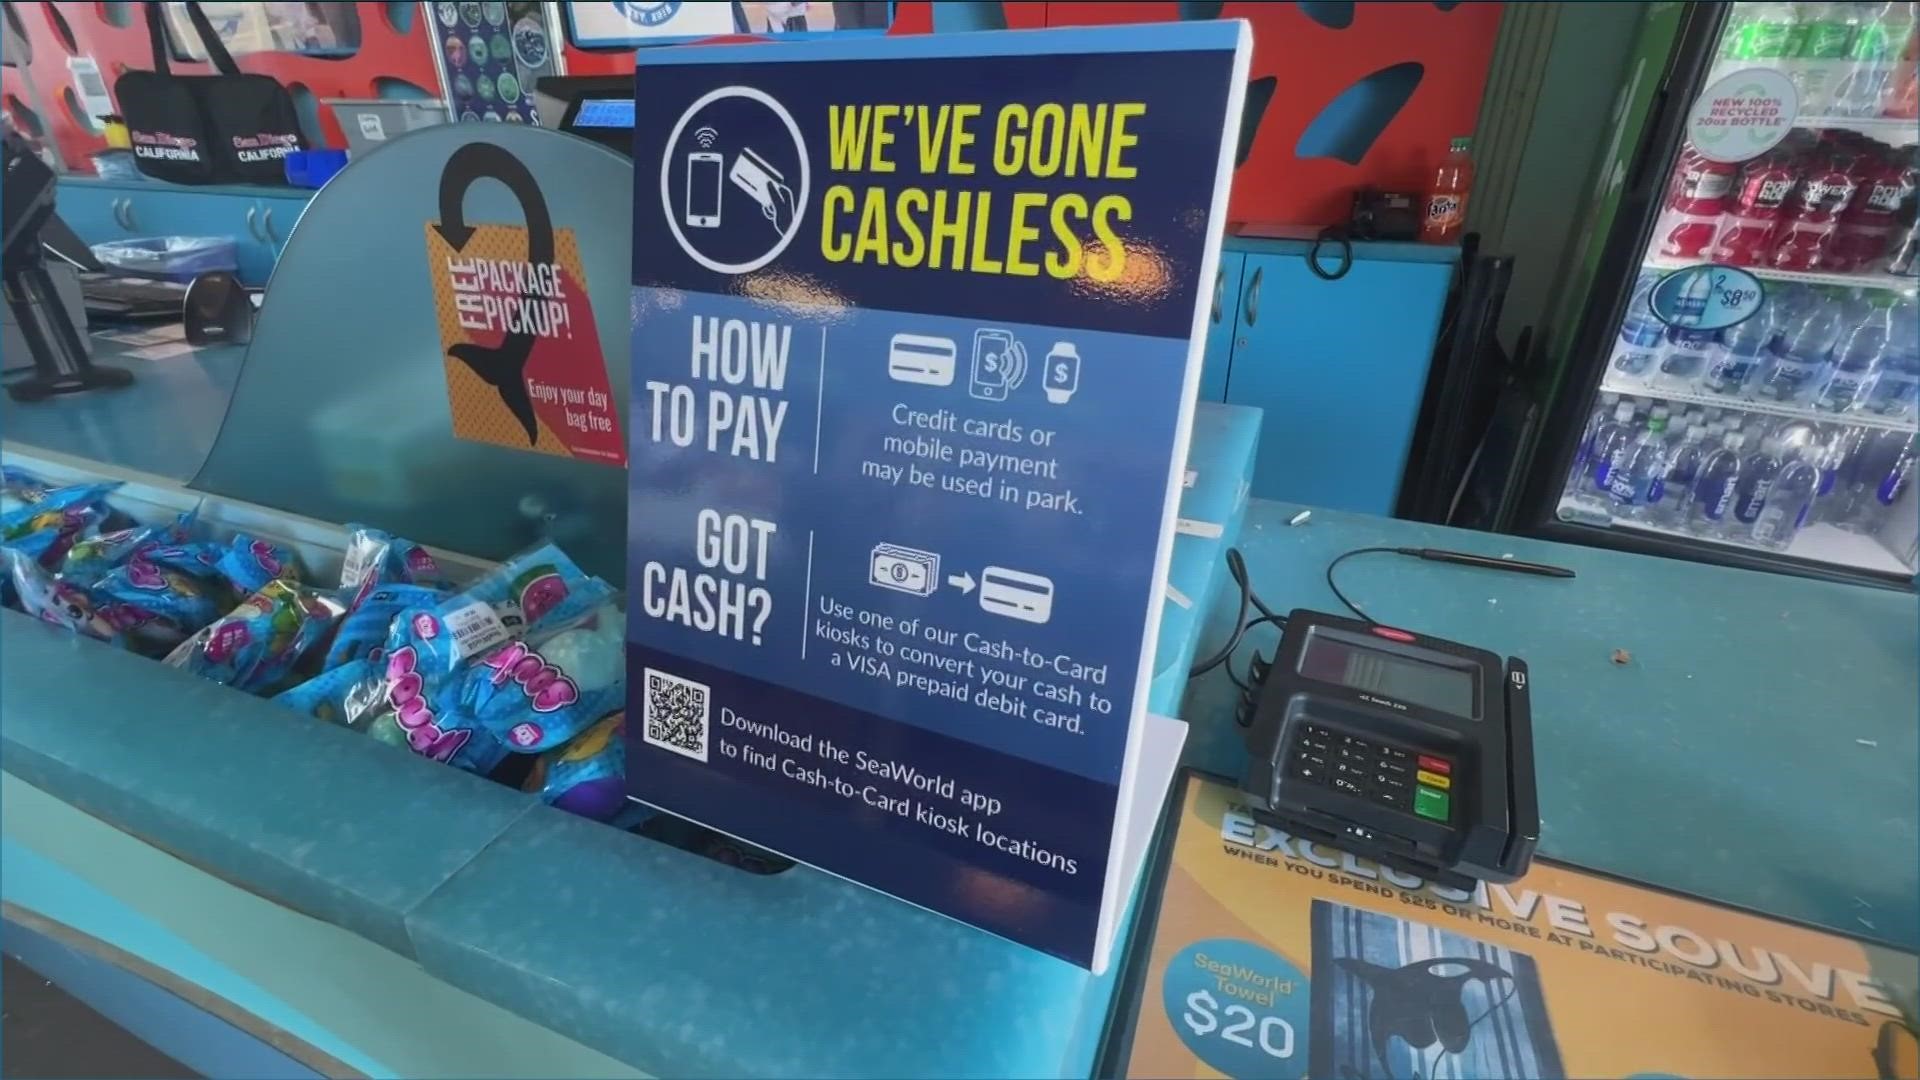 SeaWorld San Diego switched to cashless operations, meaning you have to swipe or tap your credit card, debit card, or smart device everywhere you typically use cash.